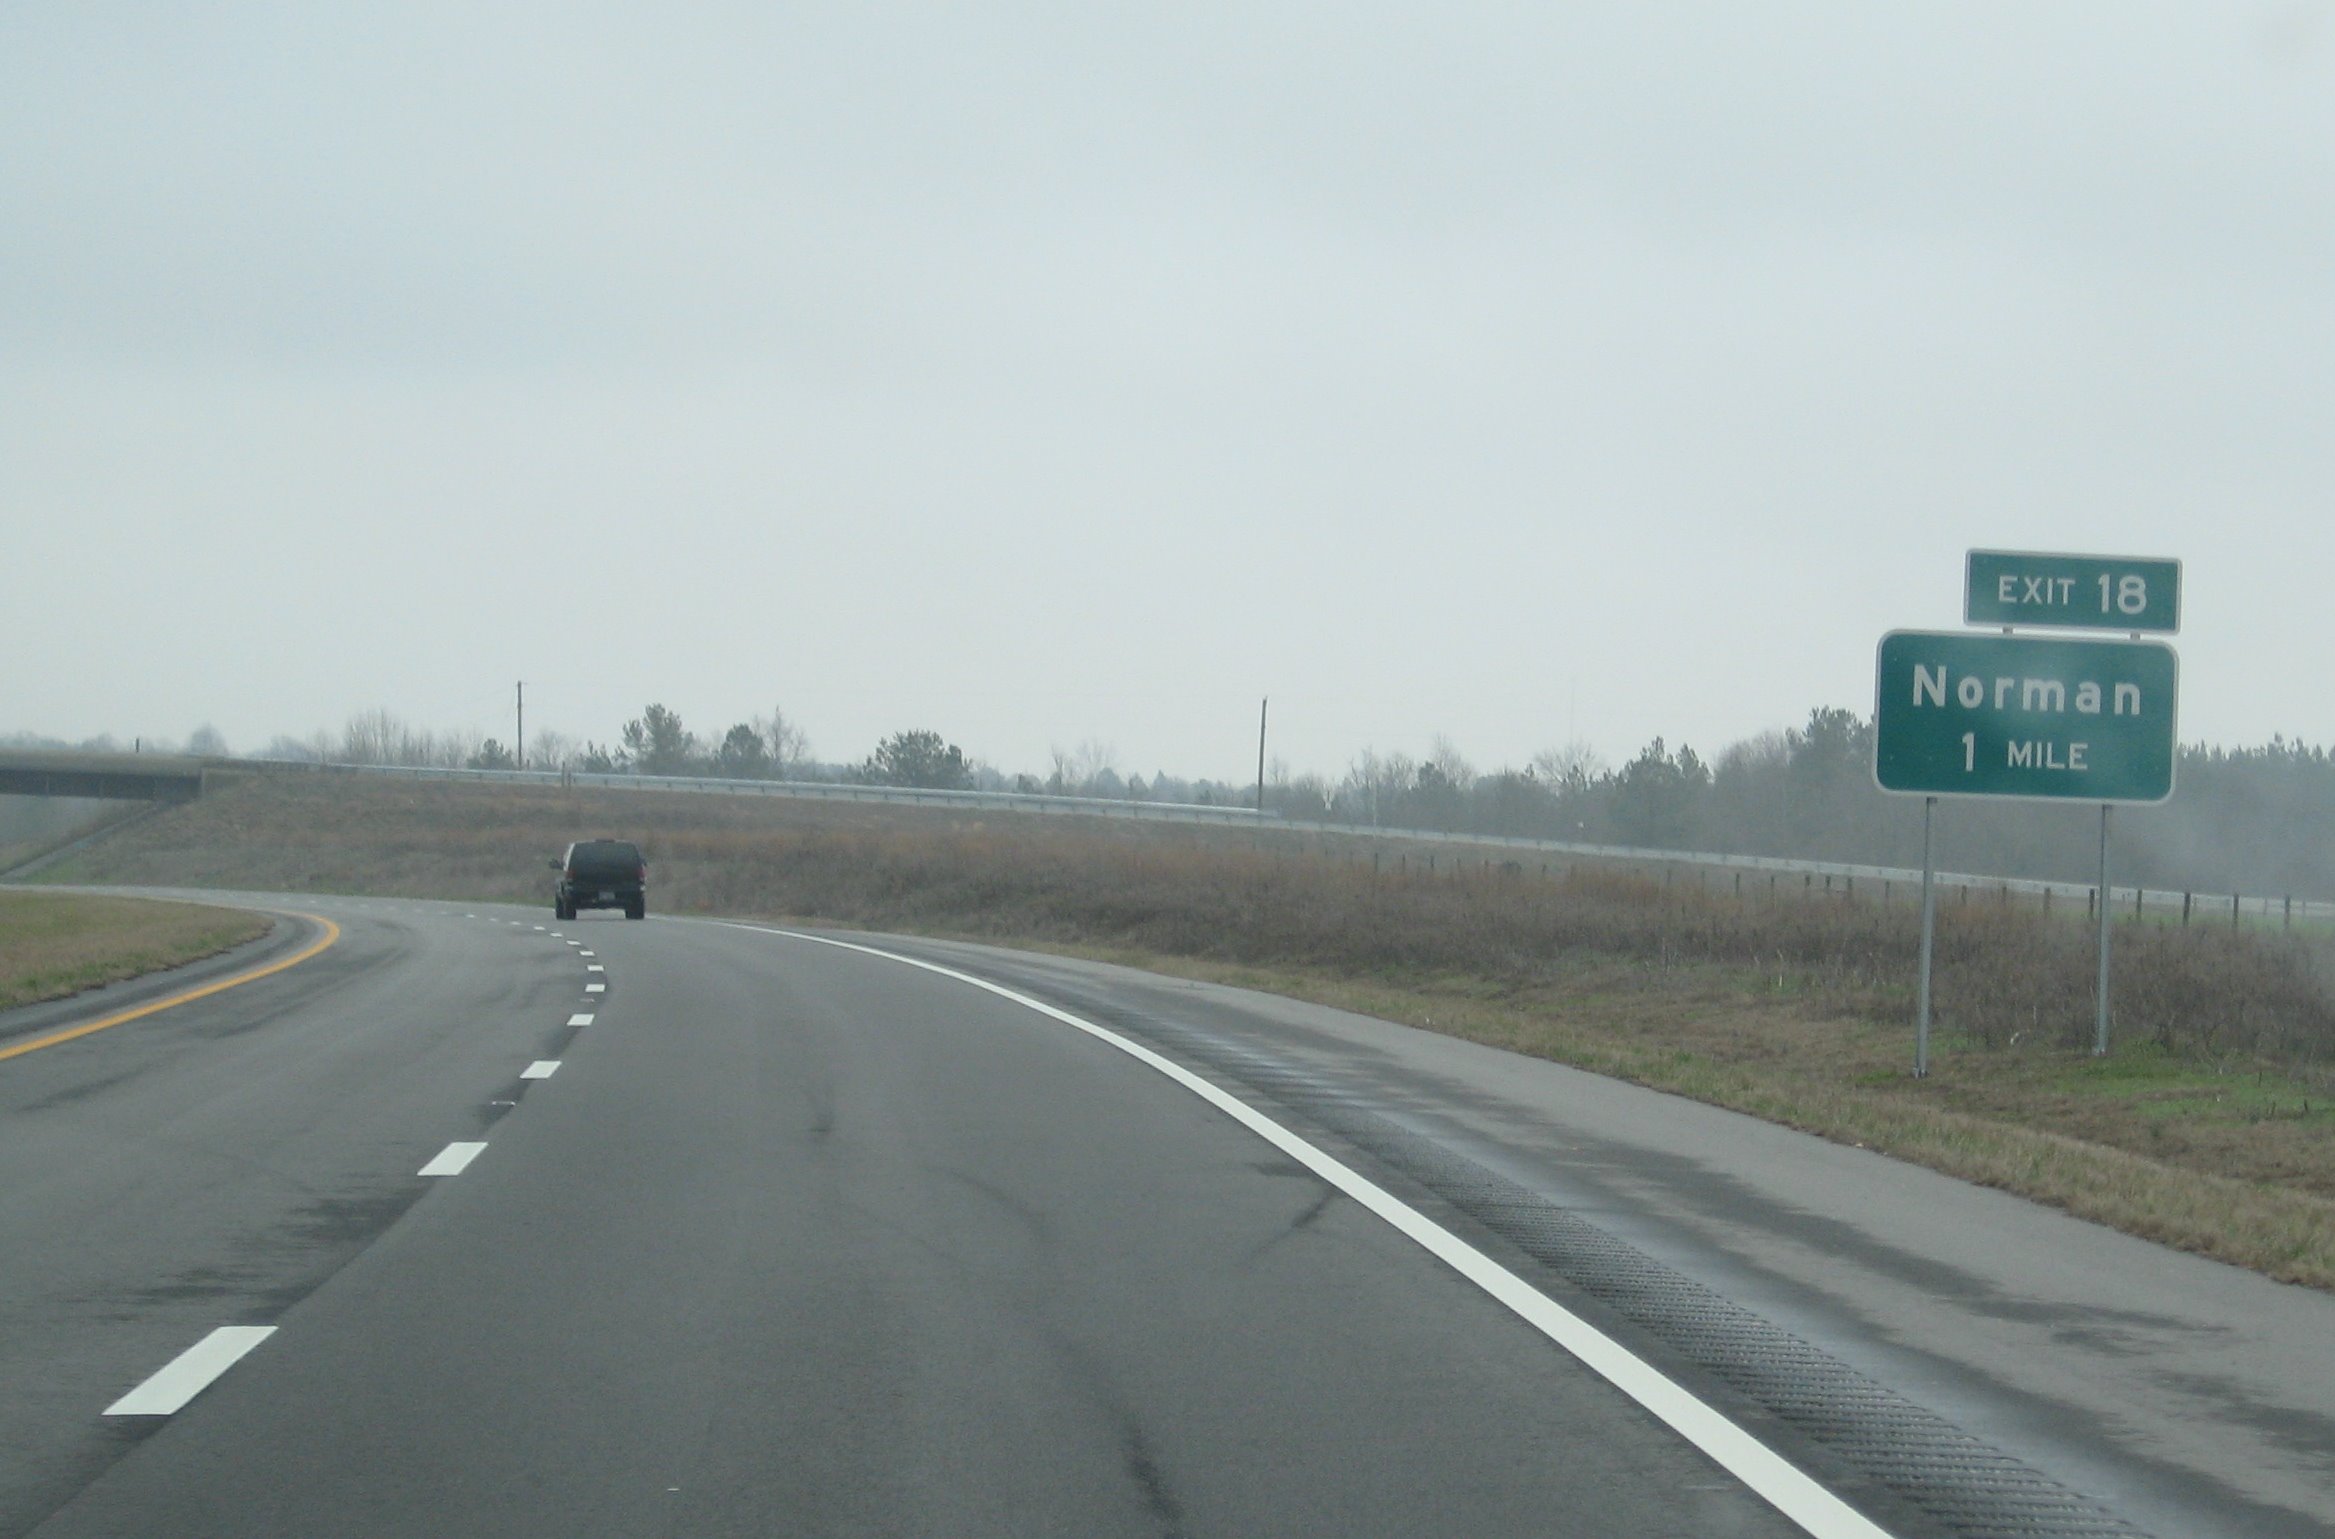 Photo of exit sign further down the Bypass for Exit 16, Norman on Future 
I-73/I-74, Feb. 2008